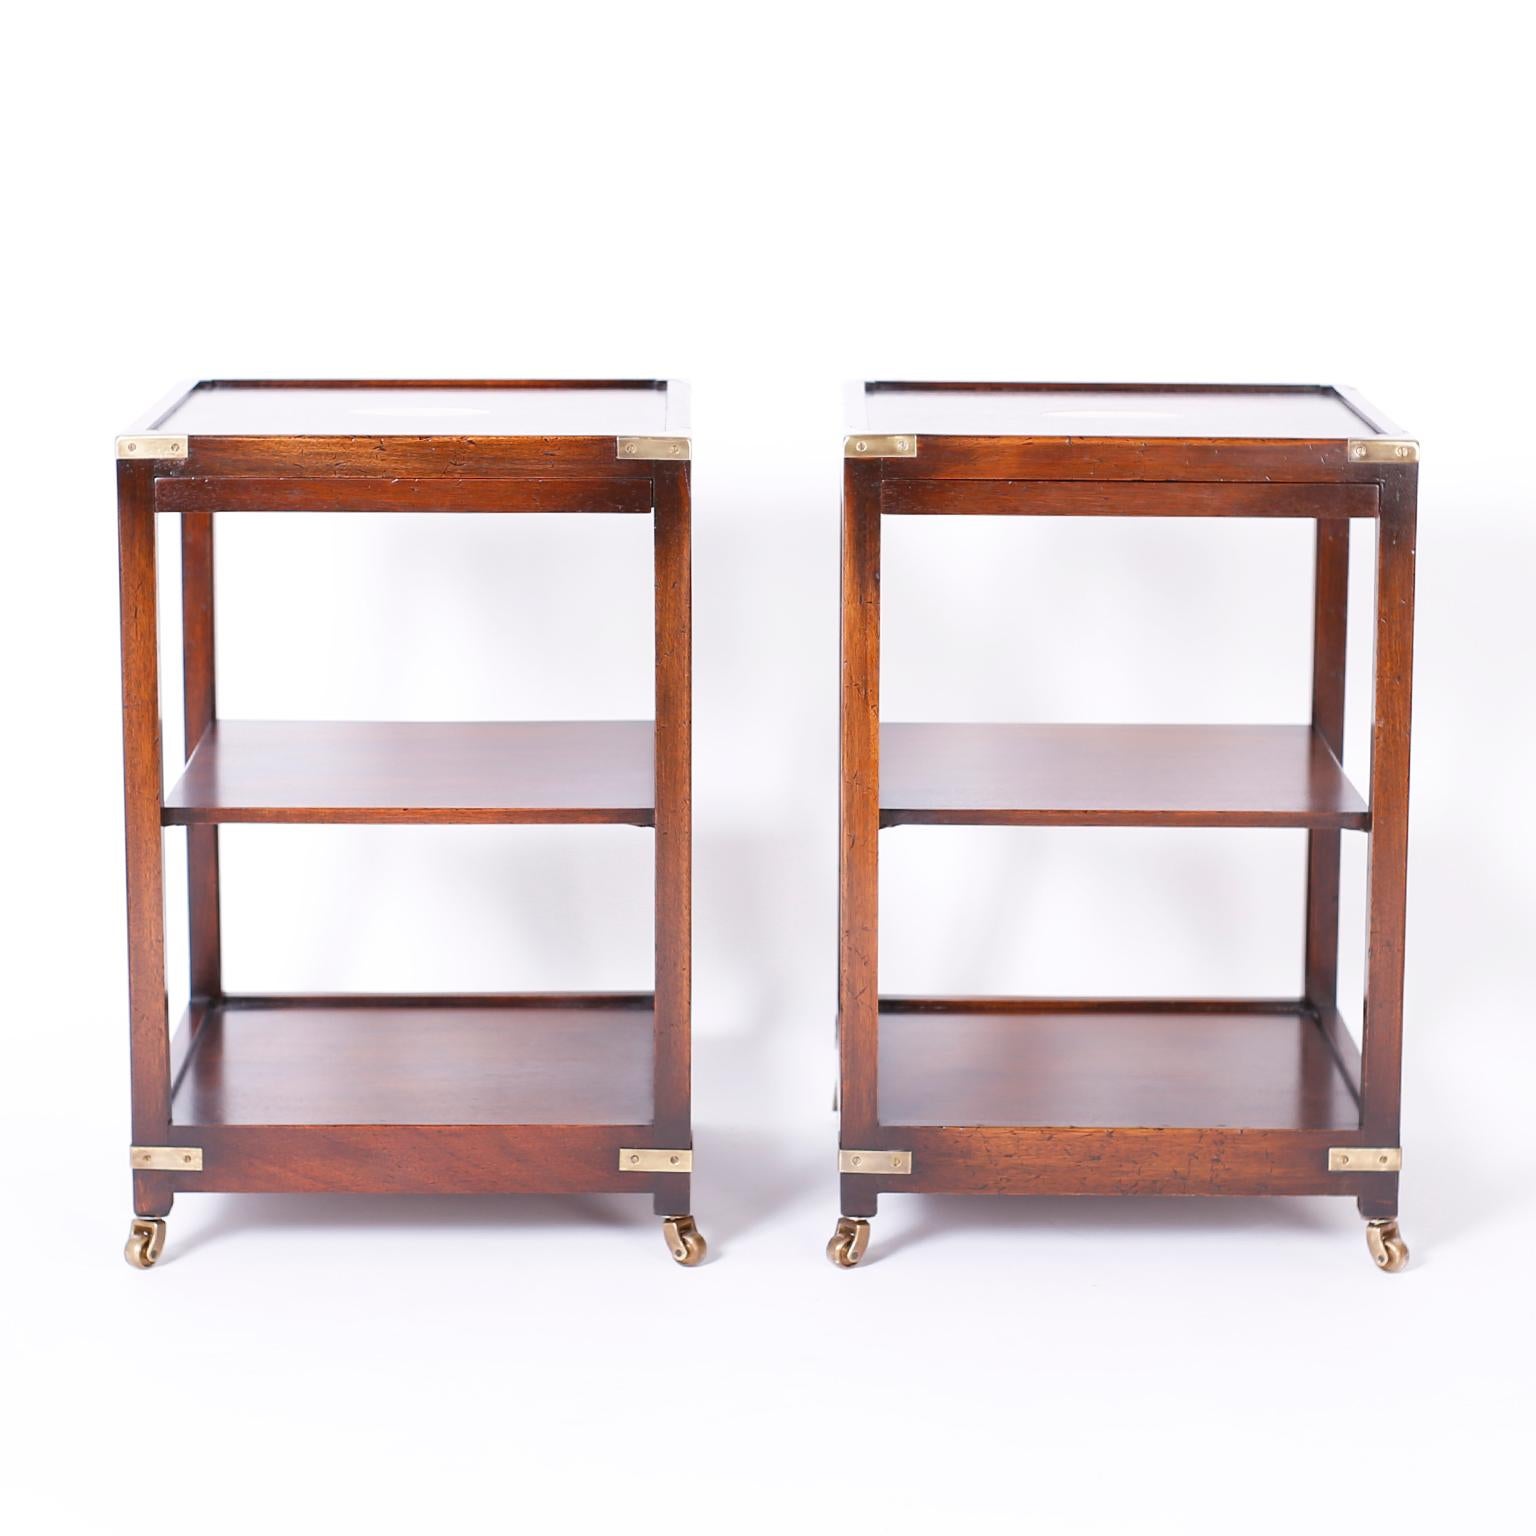 Pair of Midcentury Three Tiered Campaign Style Tables or Stands with Pullouts 2